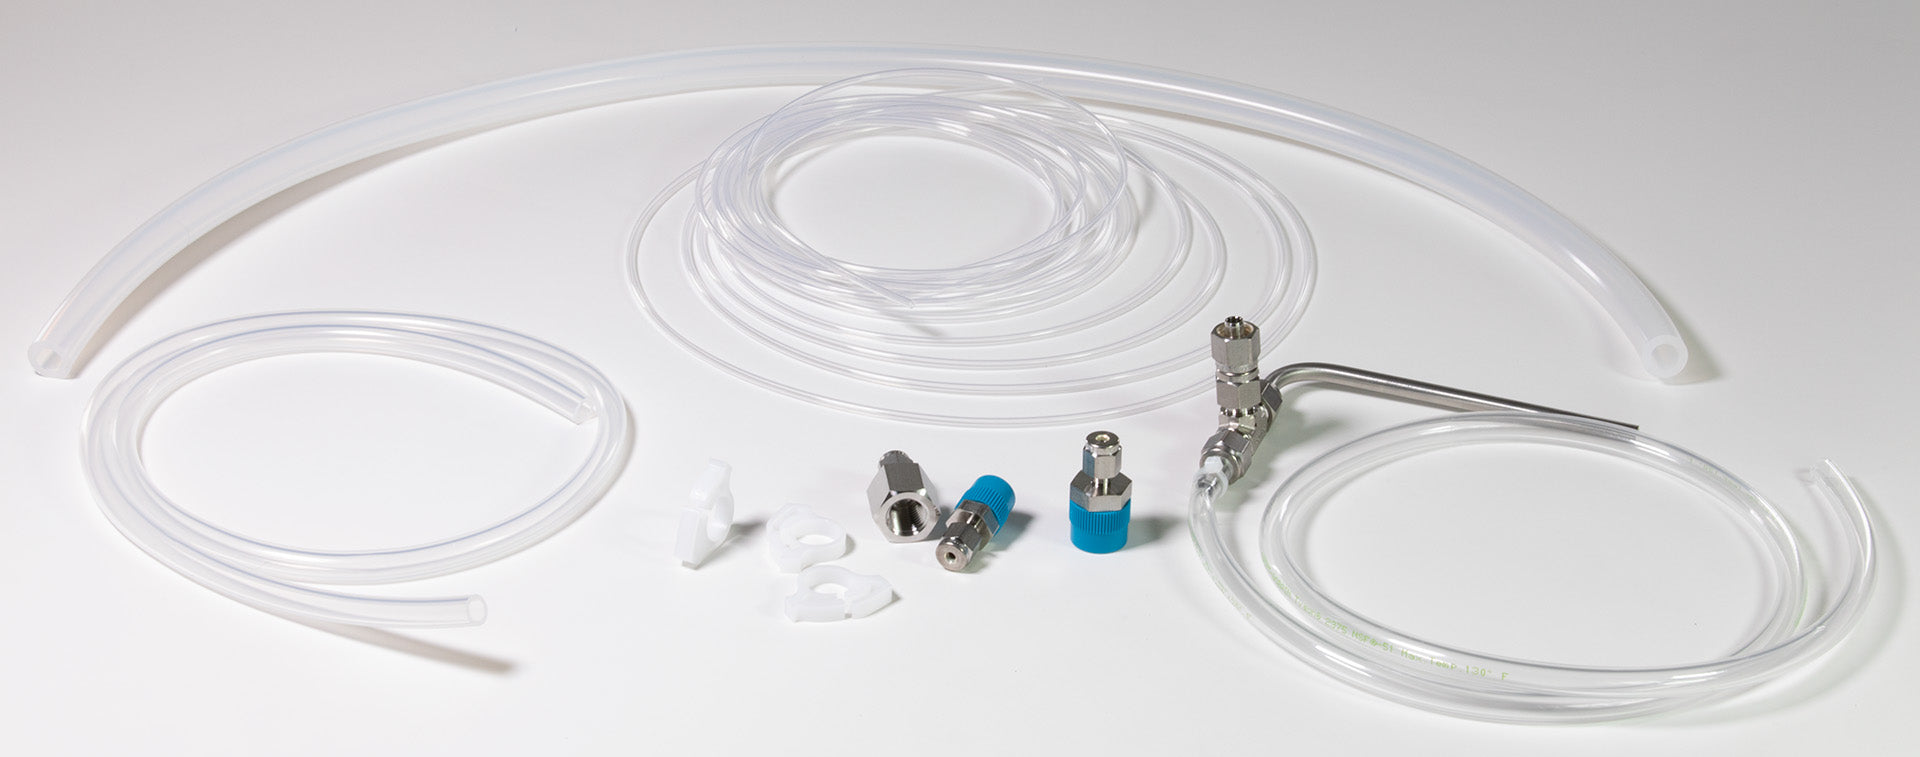 Accessory Package for Auto-Ranging ELSD.  Includes PTFE tubing, silicone tubing, drain adapter with vent, connectors and hose clamps.